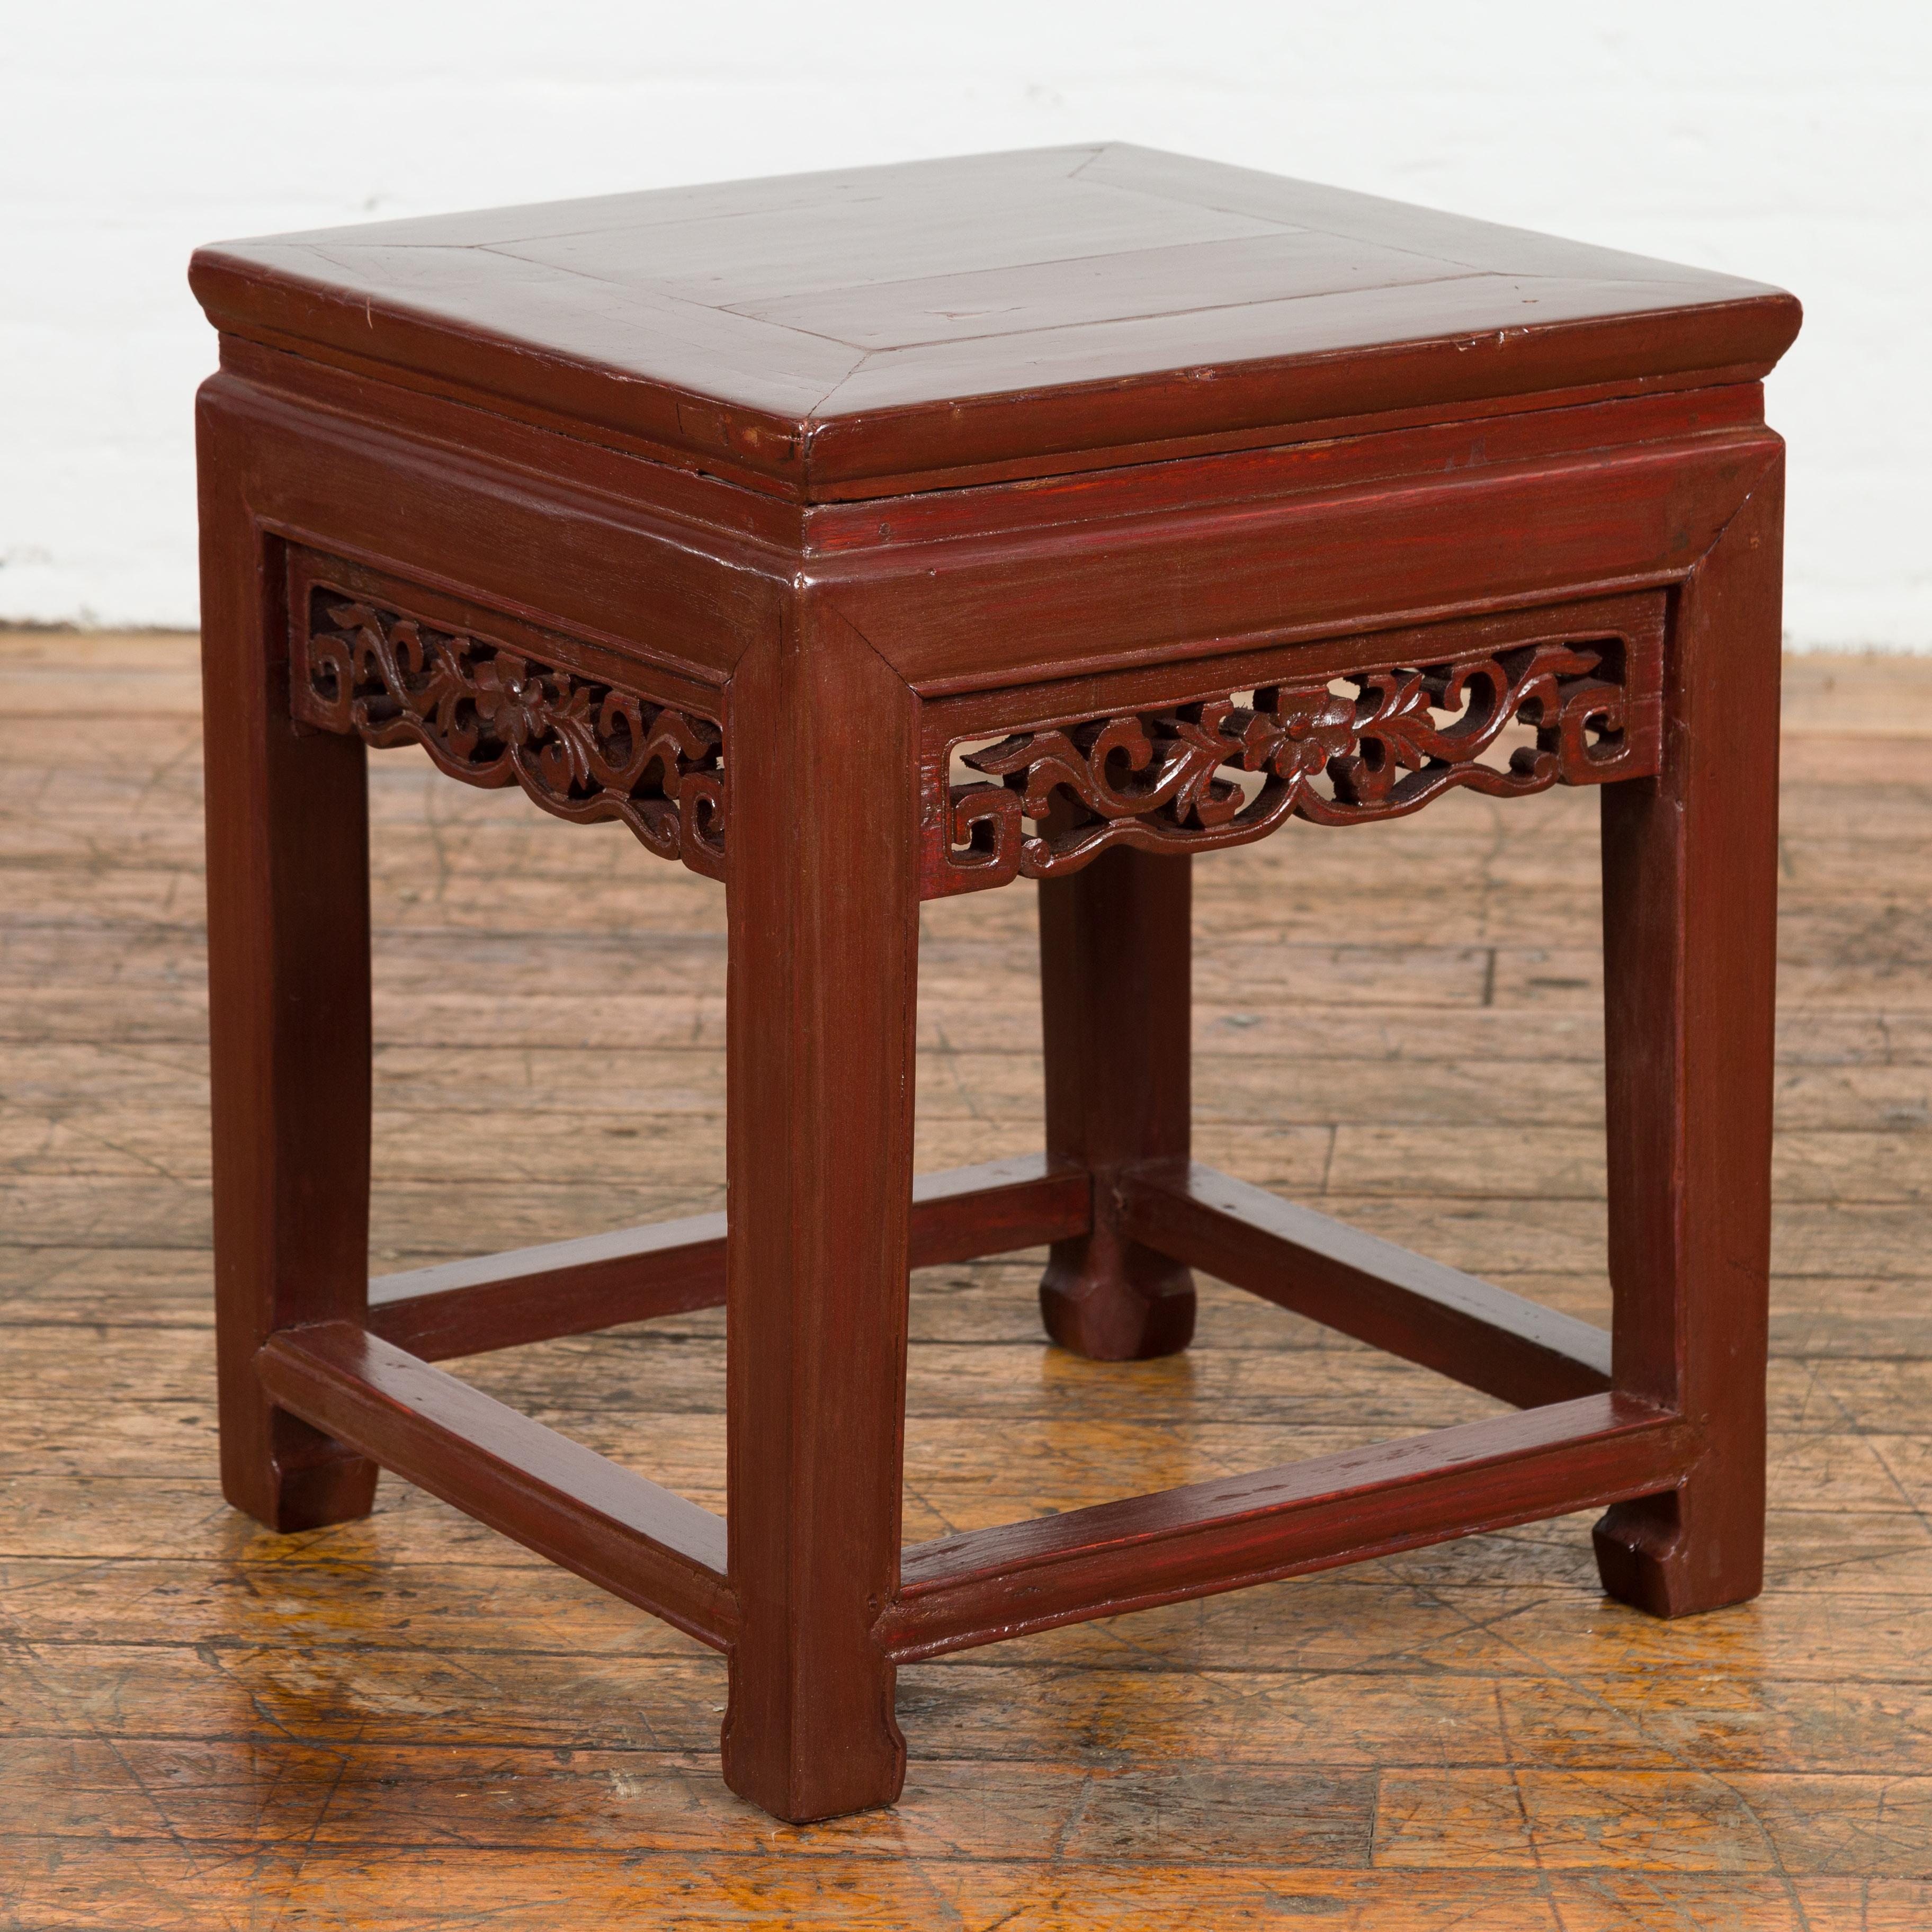 Chinese Late Qing Dynasty Period Red Lacquer Carved Side Table or Stool In Good Condition For Sale In Yonkers, NY